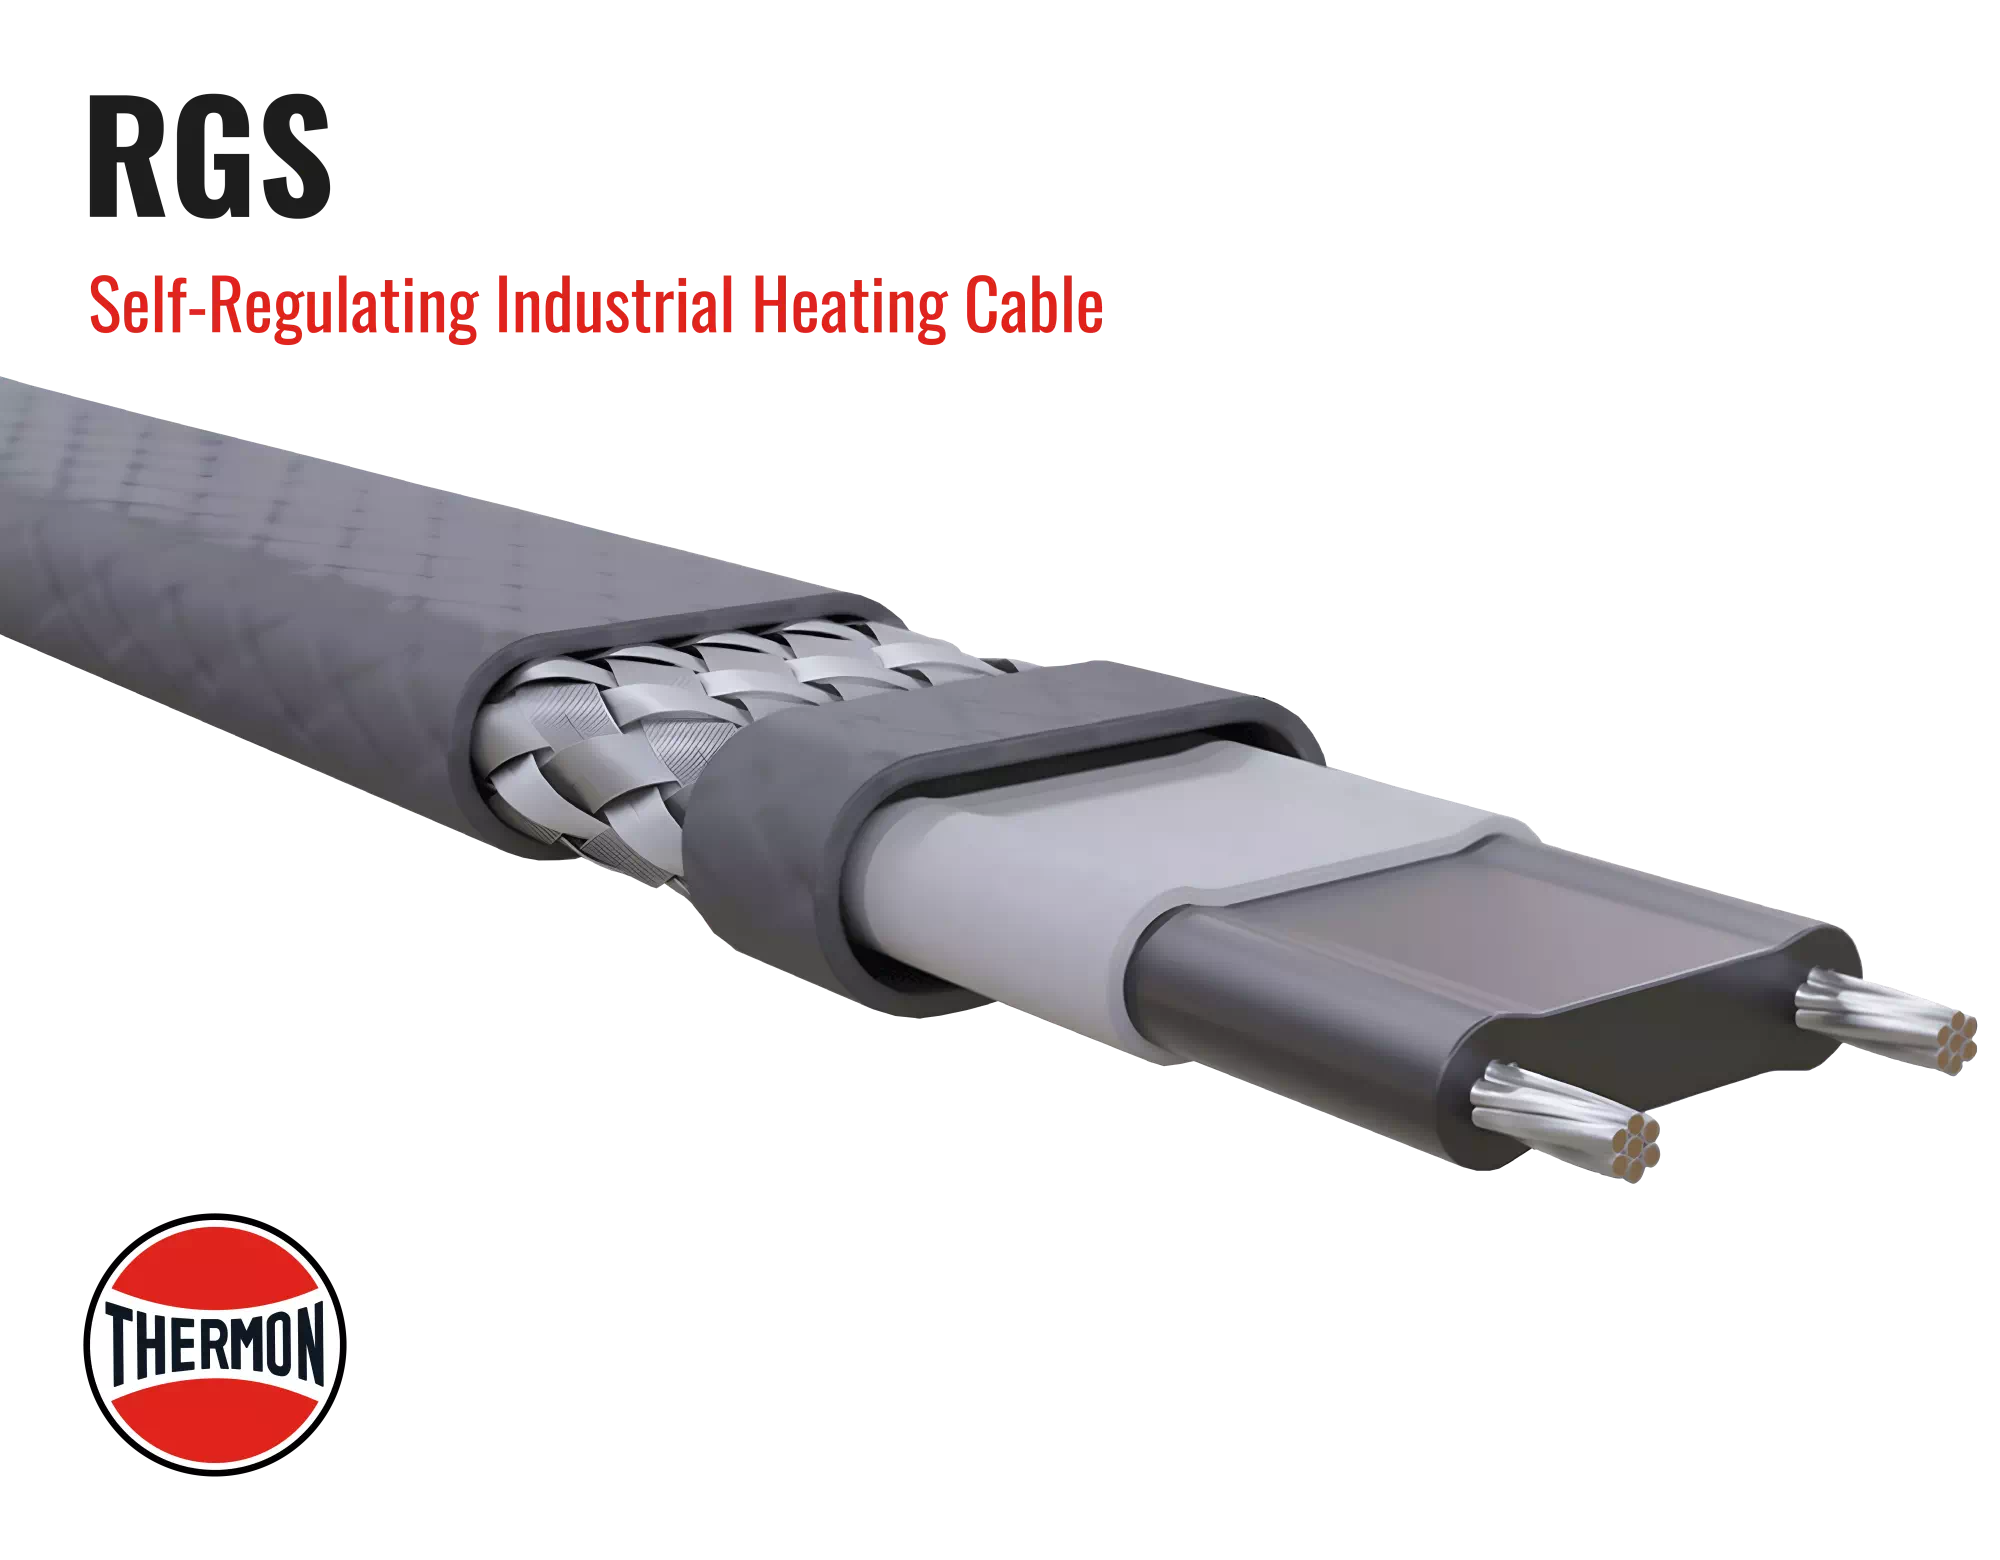 Thermon RGS-Self-Regulating-Heating-Cable